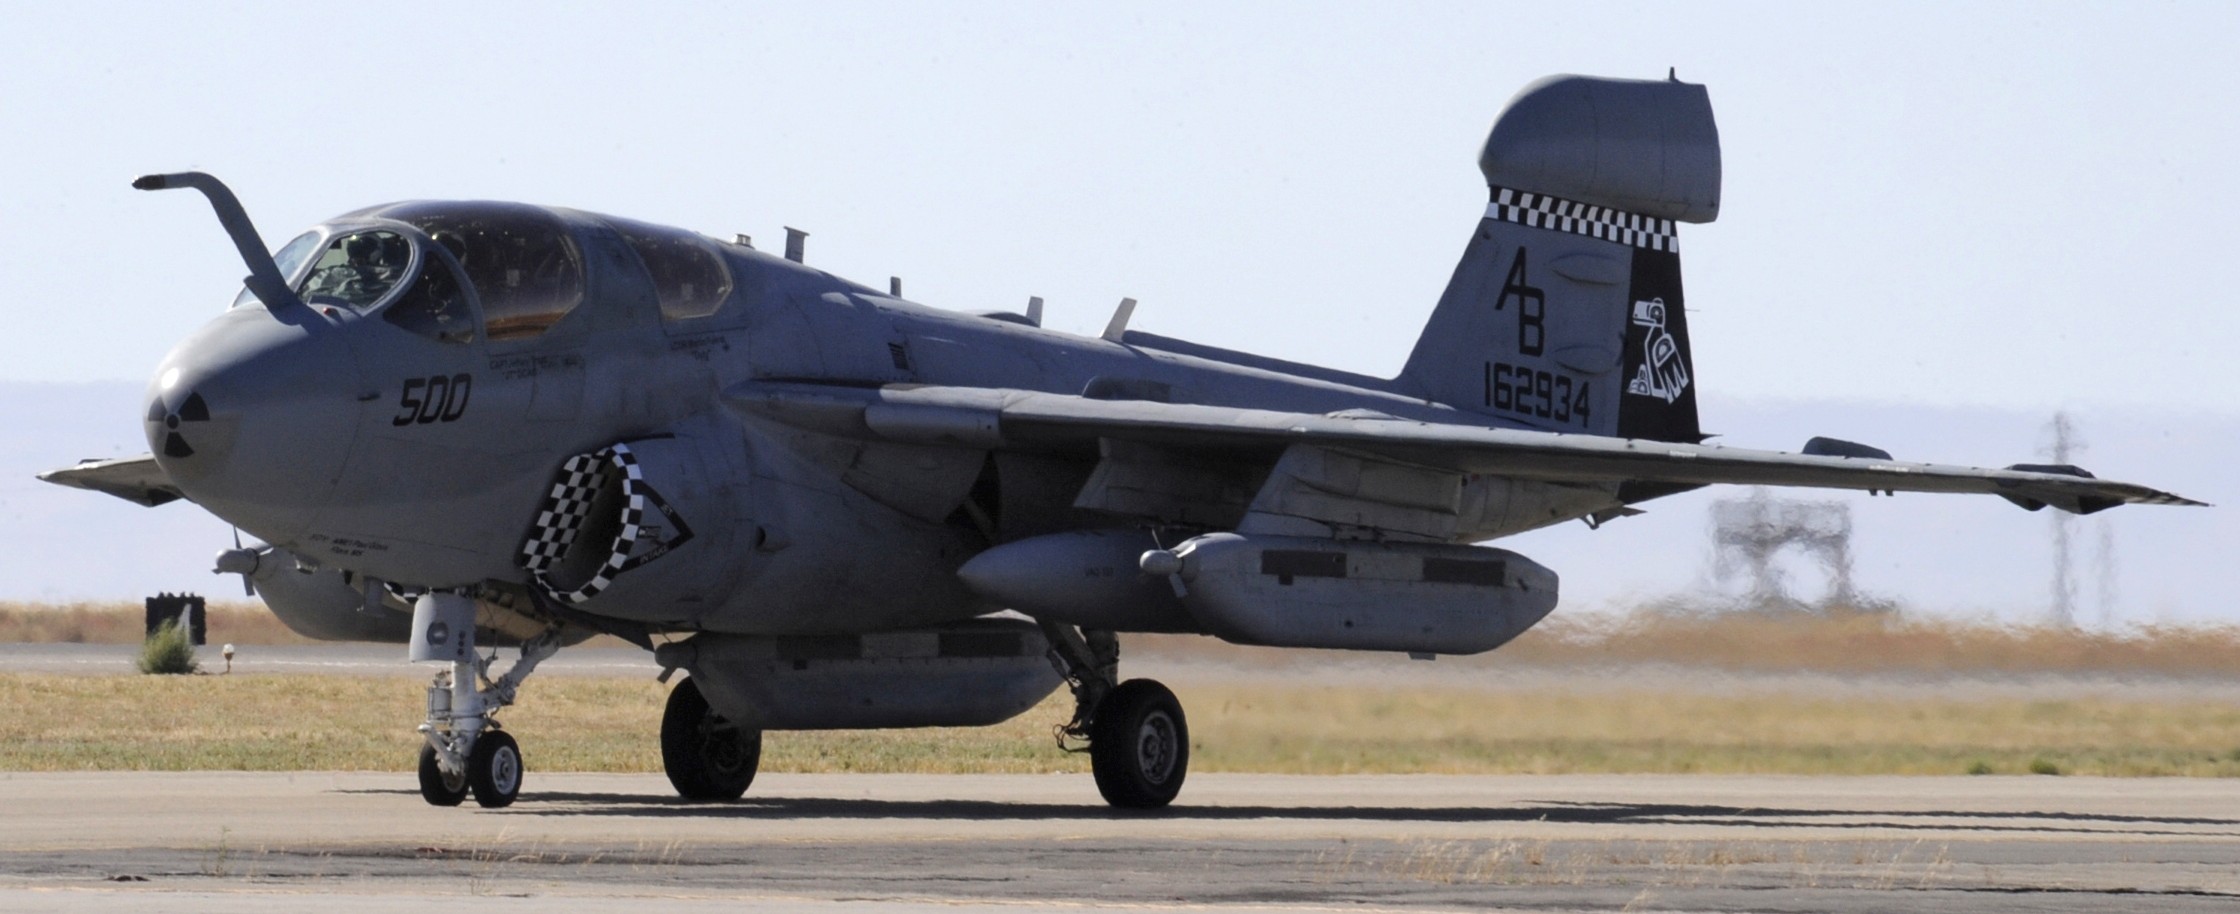 vaq-137 rooks electronic attack squadron us navy ea-6b prowler carrier air wing mountain home afn idaho 17